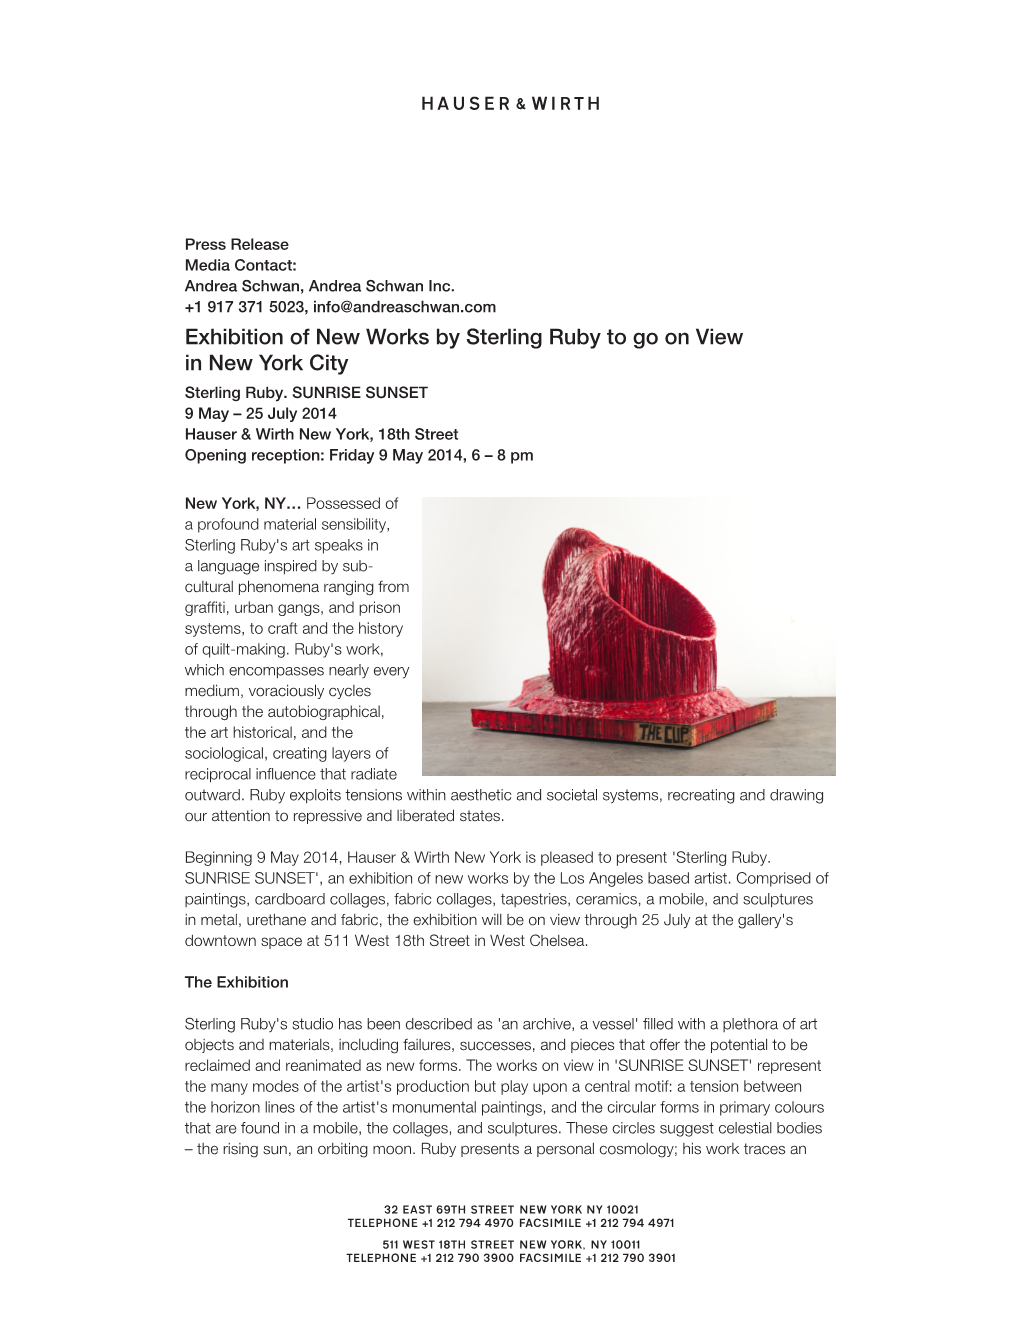 Exhibition of New Works by Sterling Ruby to Go on View in New York City Sterling Ruby